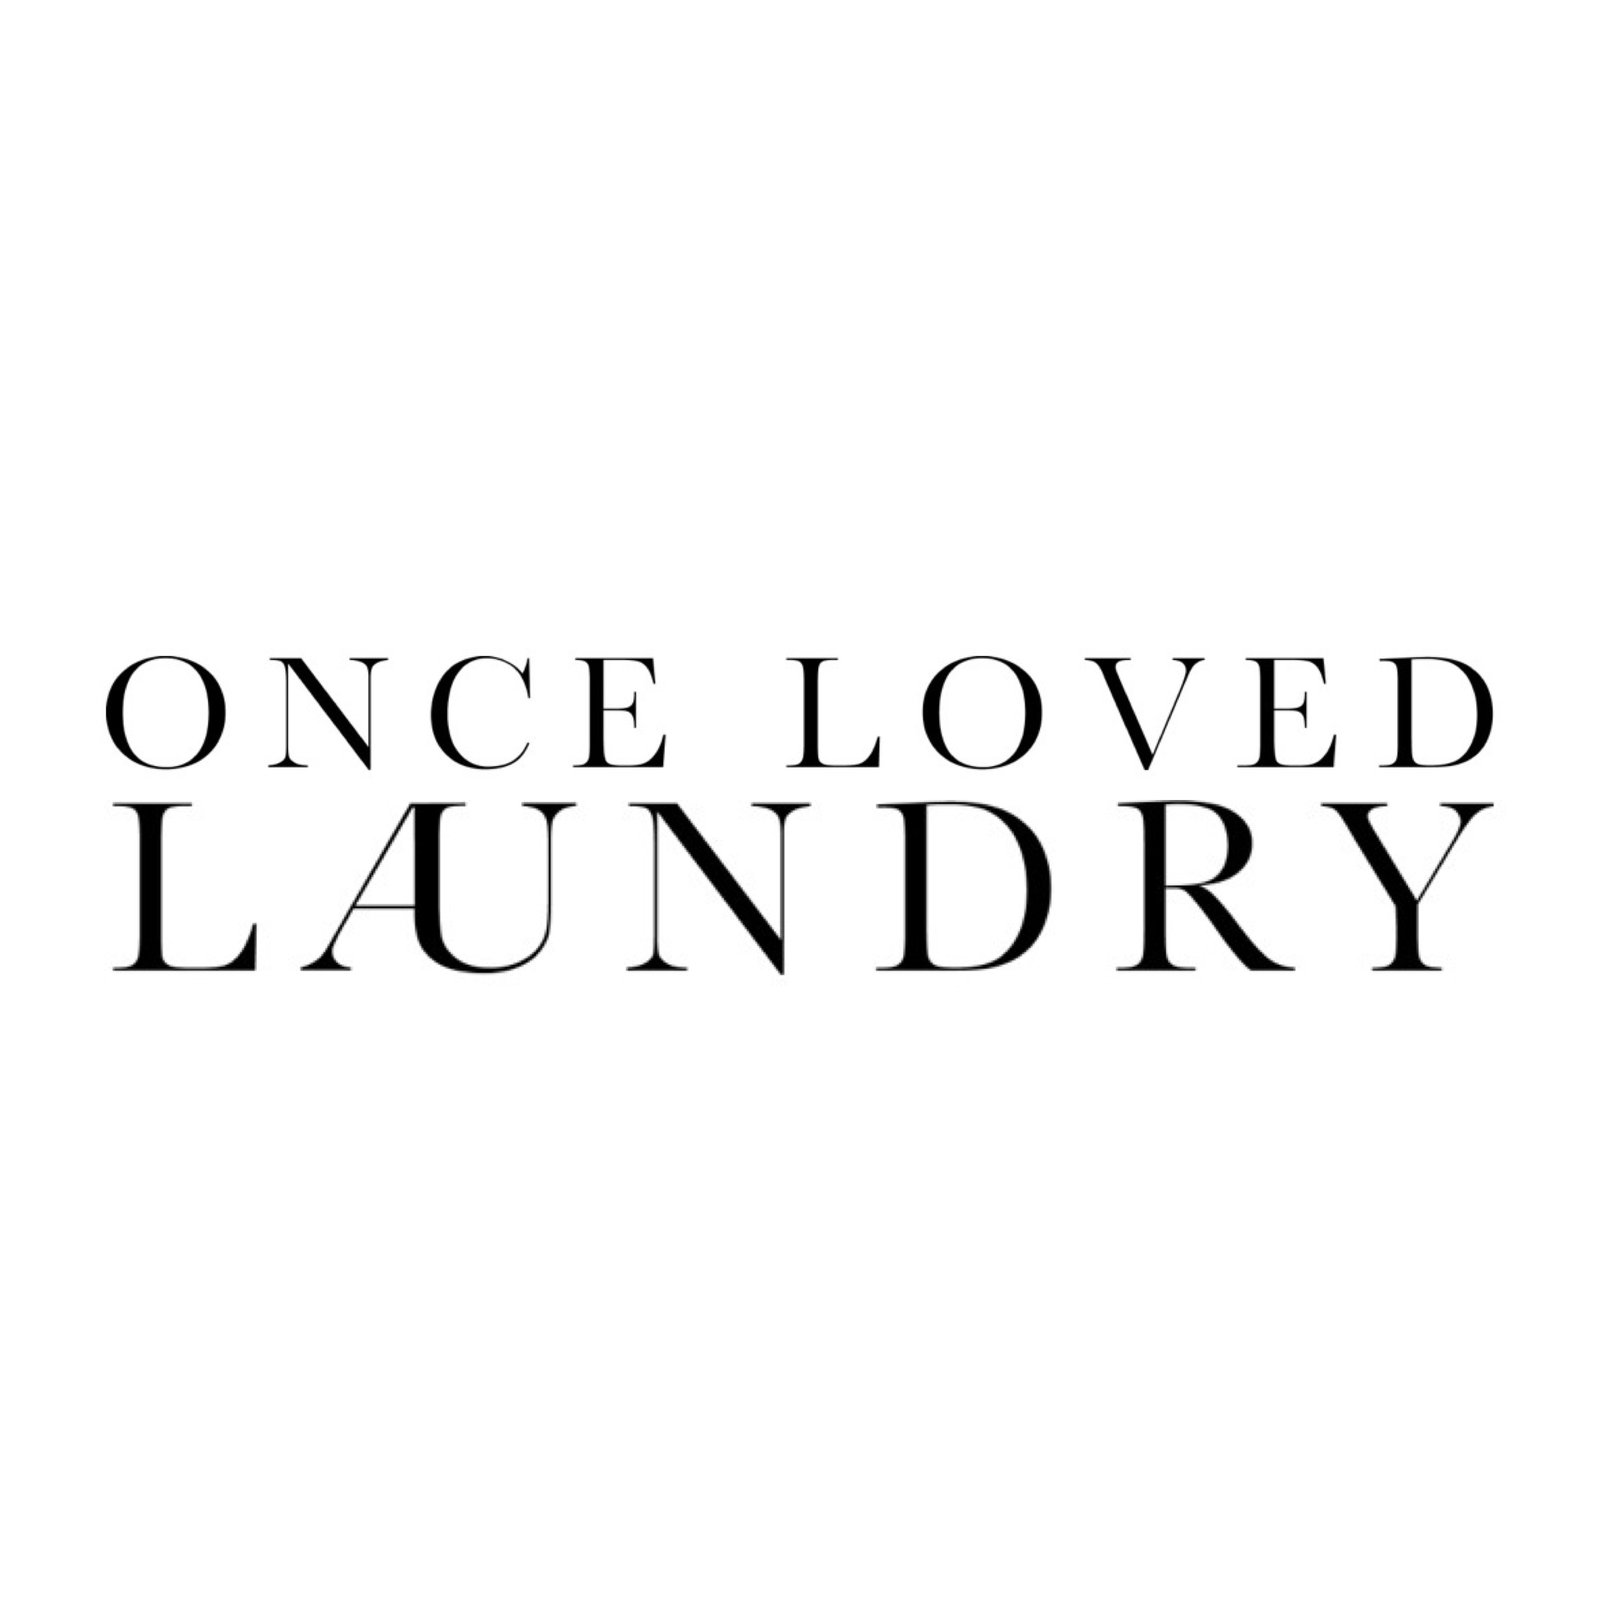 ONCE LOVED LAUNDRY